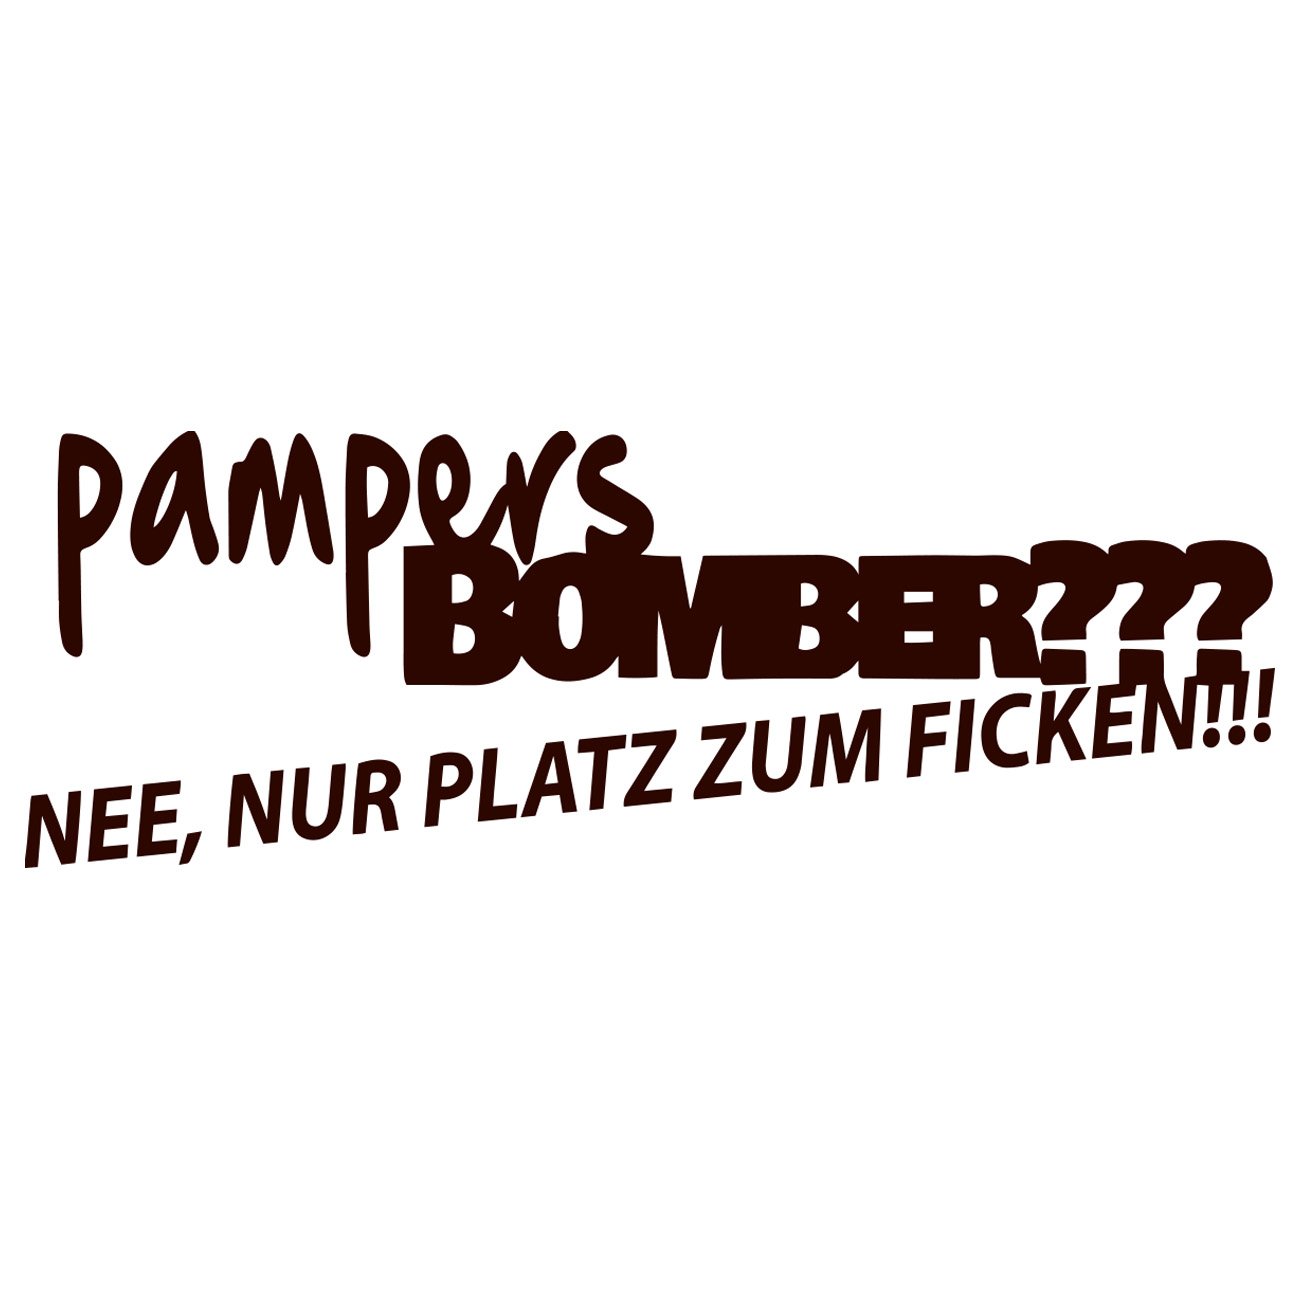 Pampers bomber